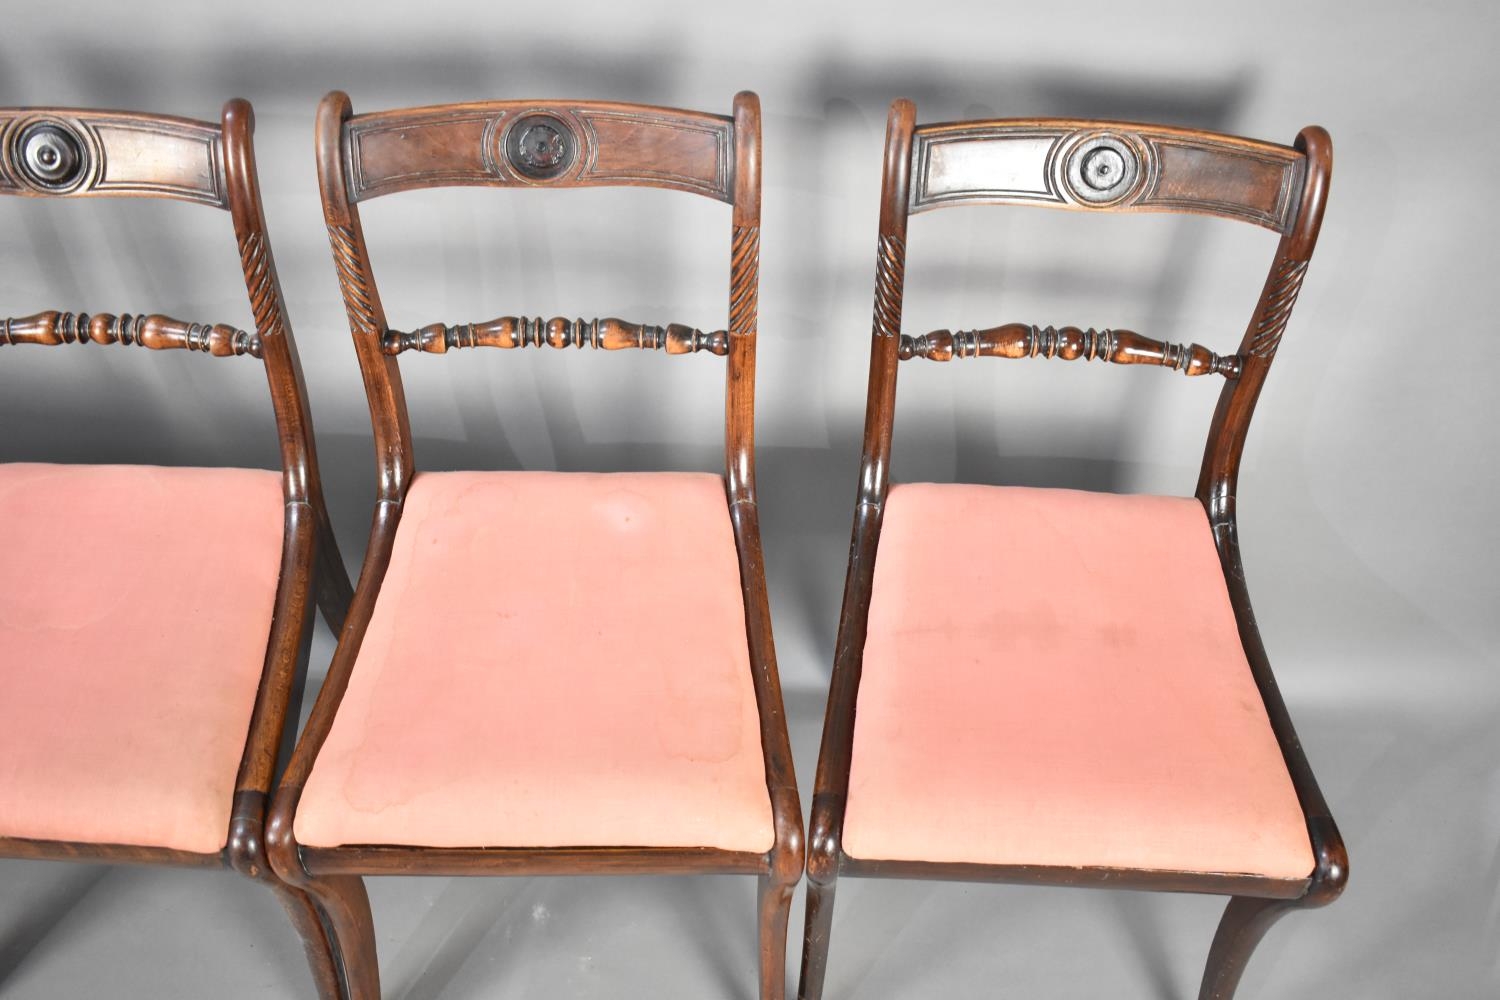 A Set of Four Bar Back Dining Chairs - Image 2 of 3